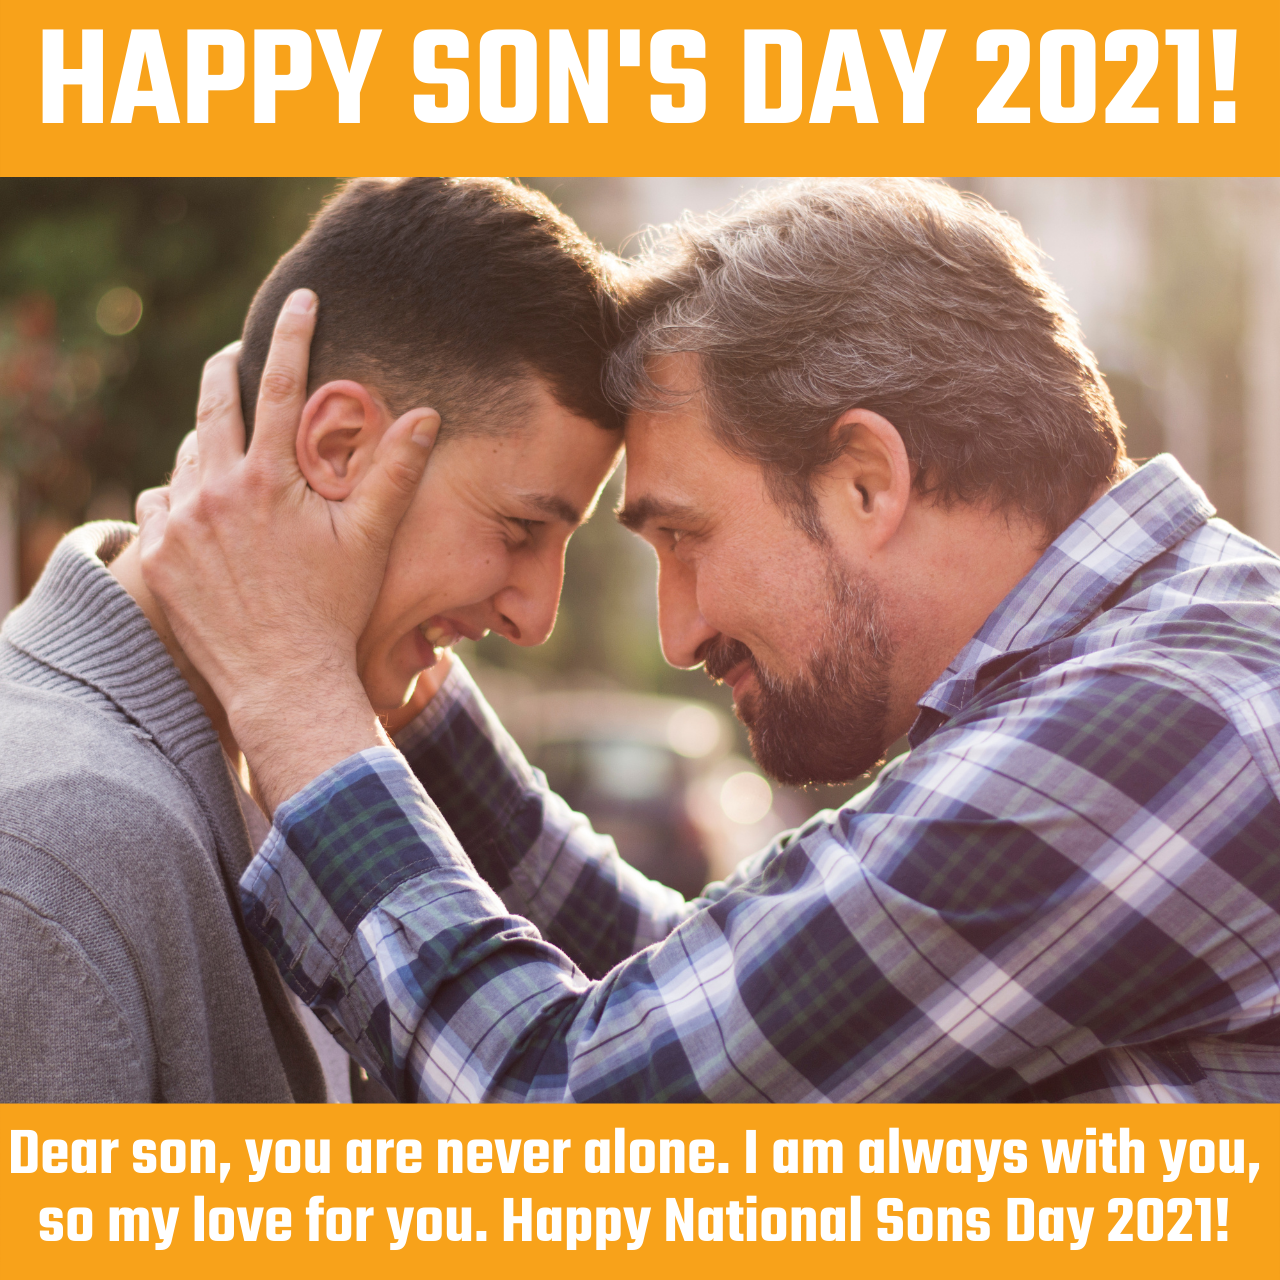 National Son's Day (US) 2021 Wishes, Quotes, Greetings, Sayings